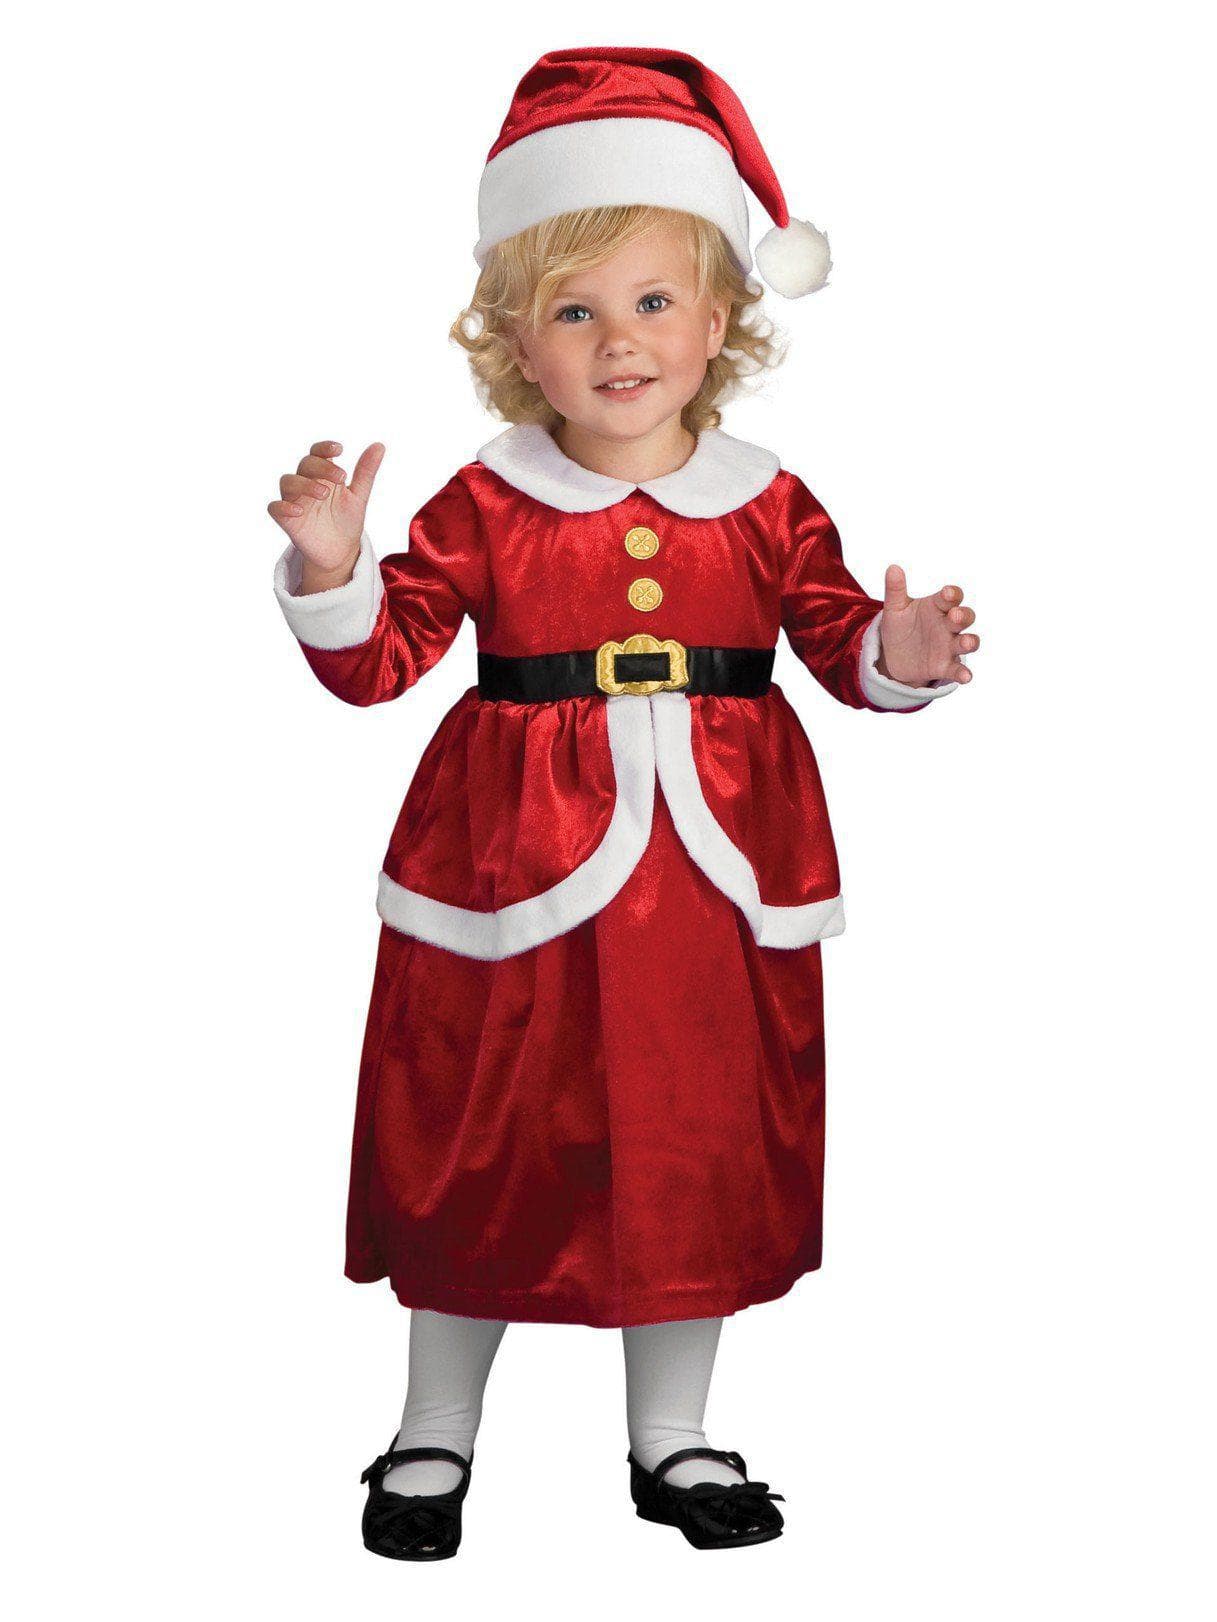 Baby/Toddler Lil Mrs Claus Costume - costumes.com